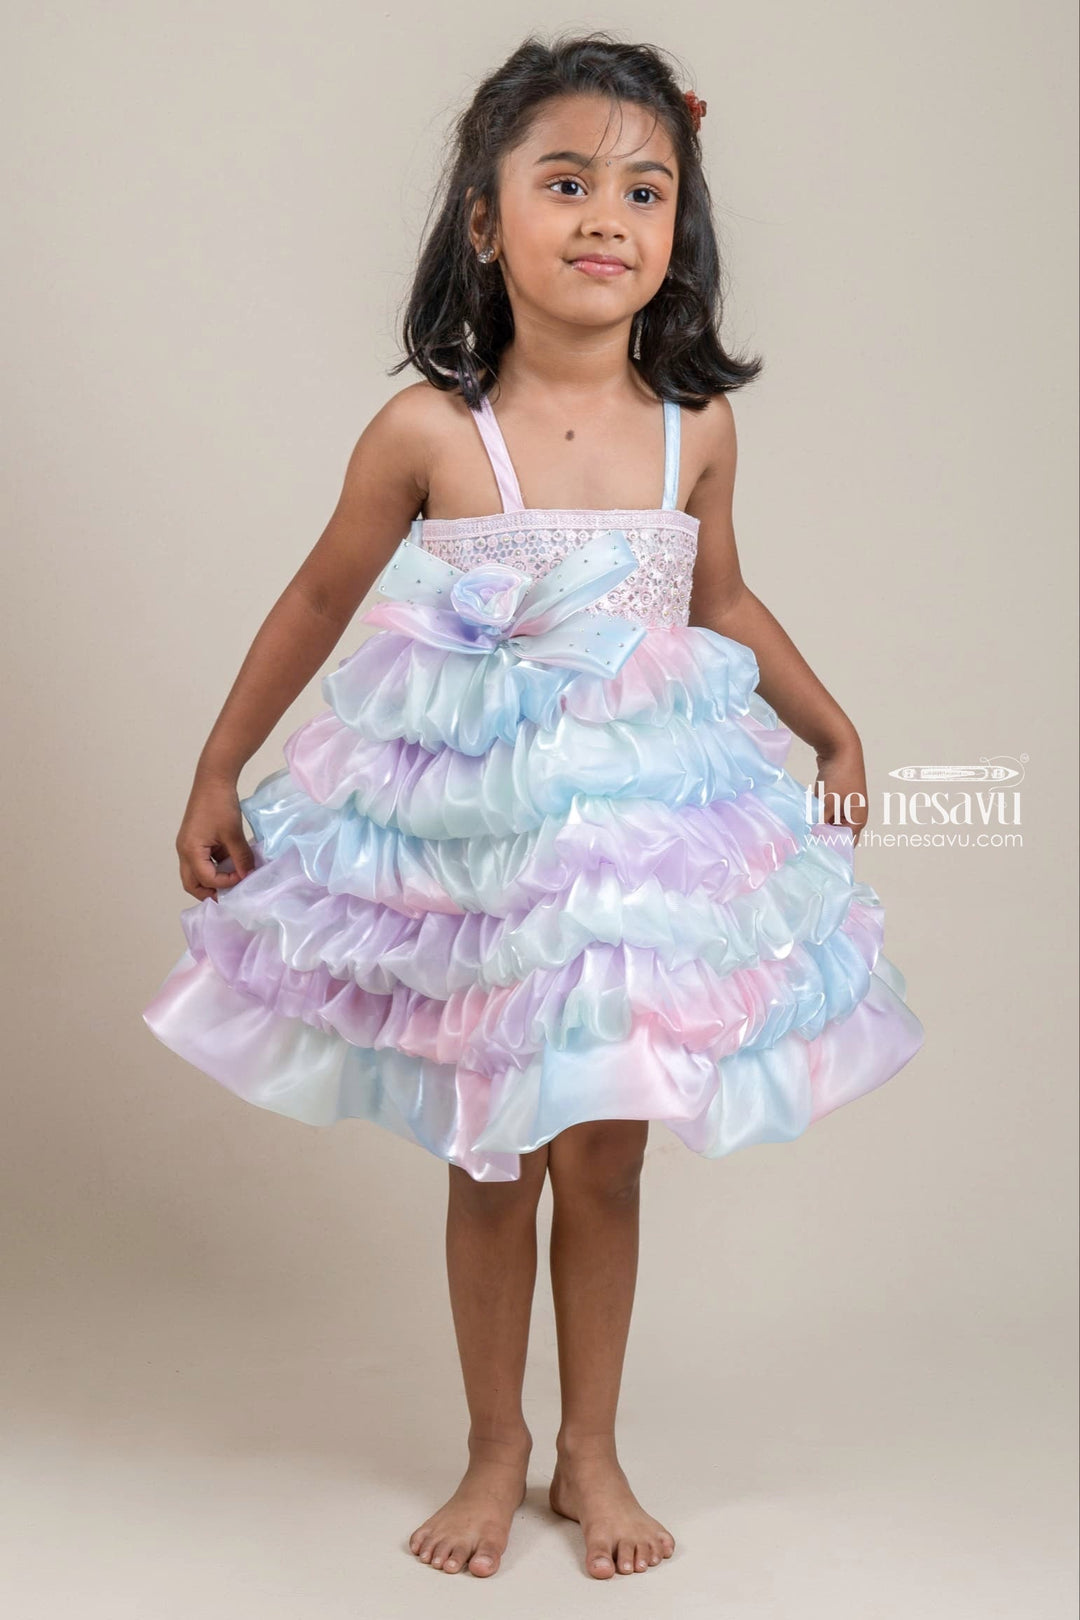 The Nesavu Girls Fancy Party Frock Dazzling Multi-Colored Ruffled Tiered Girls party Frock With Flower Applique Nesavu 16 (1Y) / multicolor PF118-16 Party wear long frock design for girls | Girls Party Frock Collection | The Nesavu